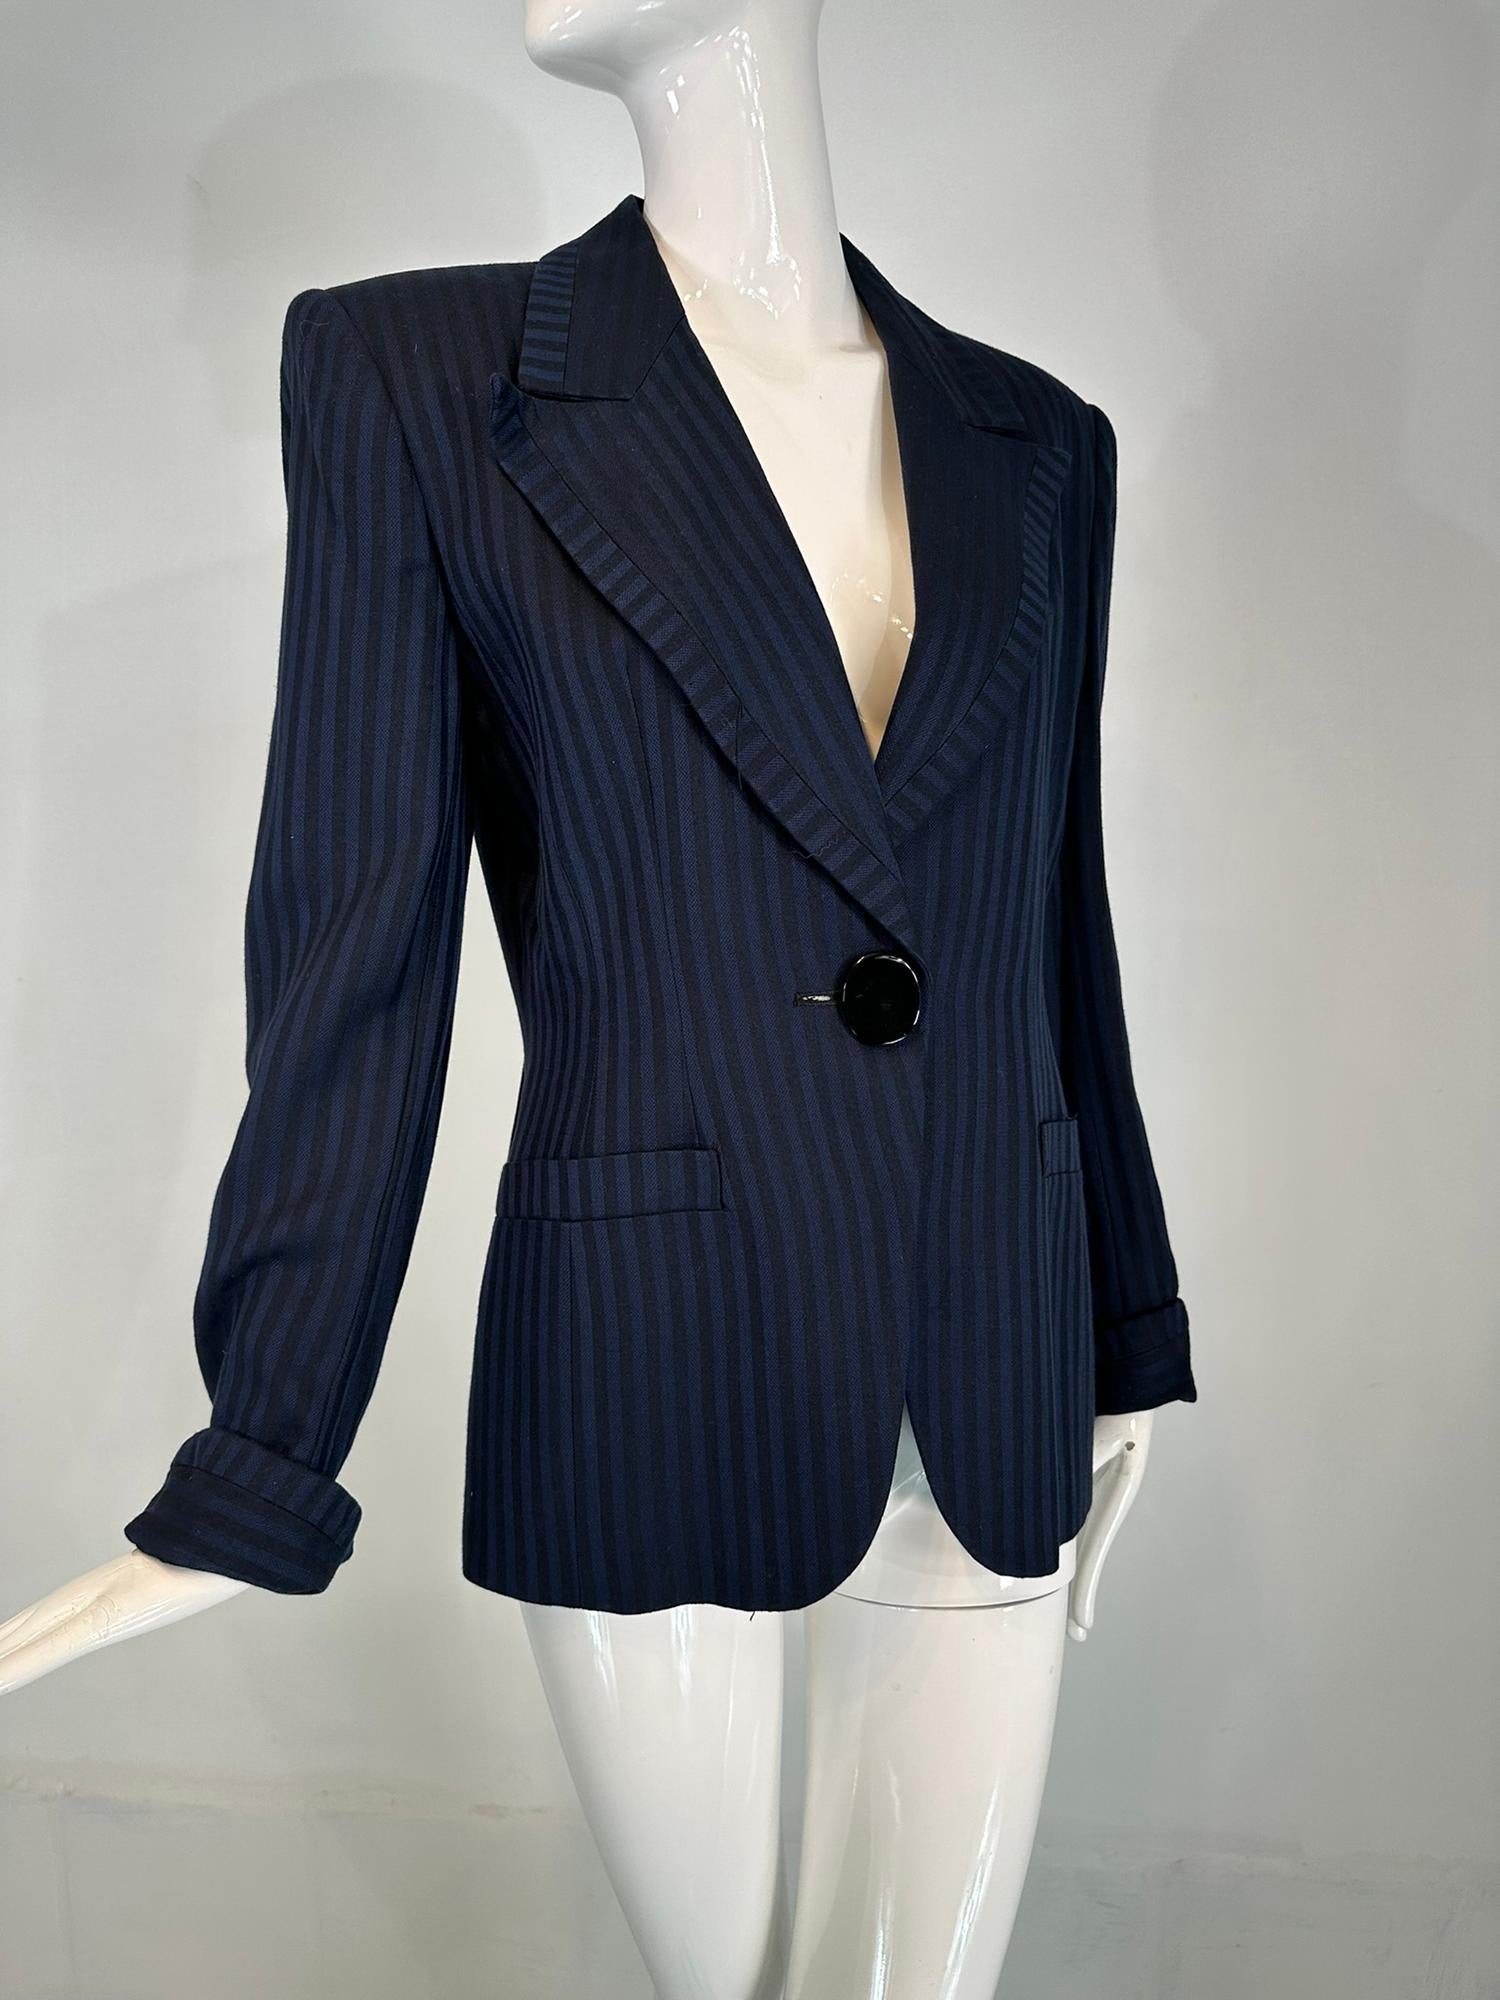 Christian Dior navy Blue & black wide stripe wool twill jacket late 1990s early 2000s. Large black oval single button waist front closure. Wide notched lapels are are faced with a band of counter set stripe fabric. Long sleeves with turn back cuffs